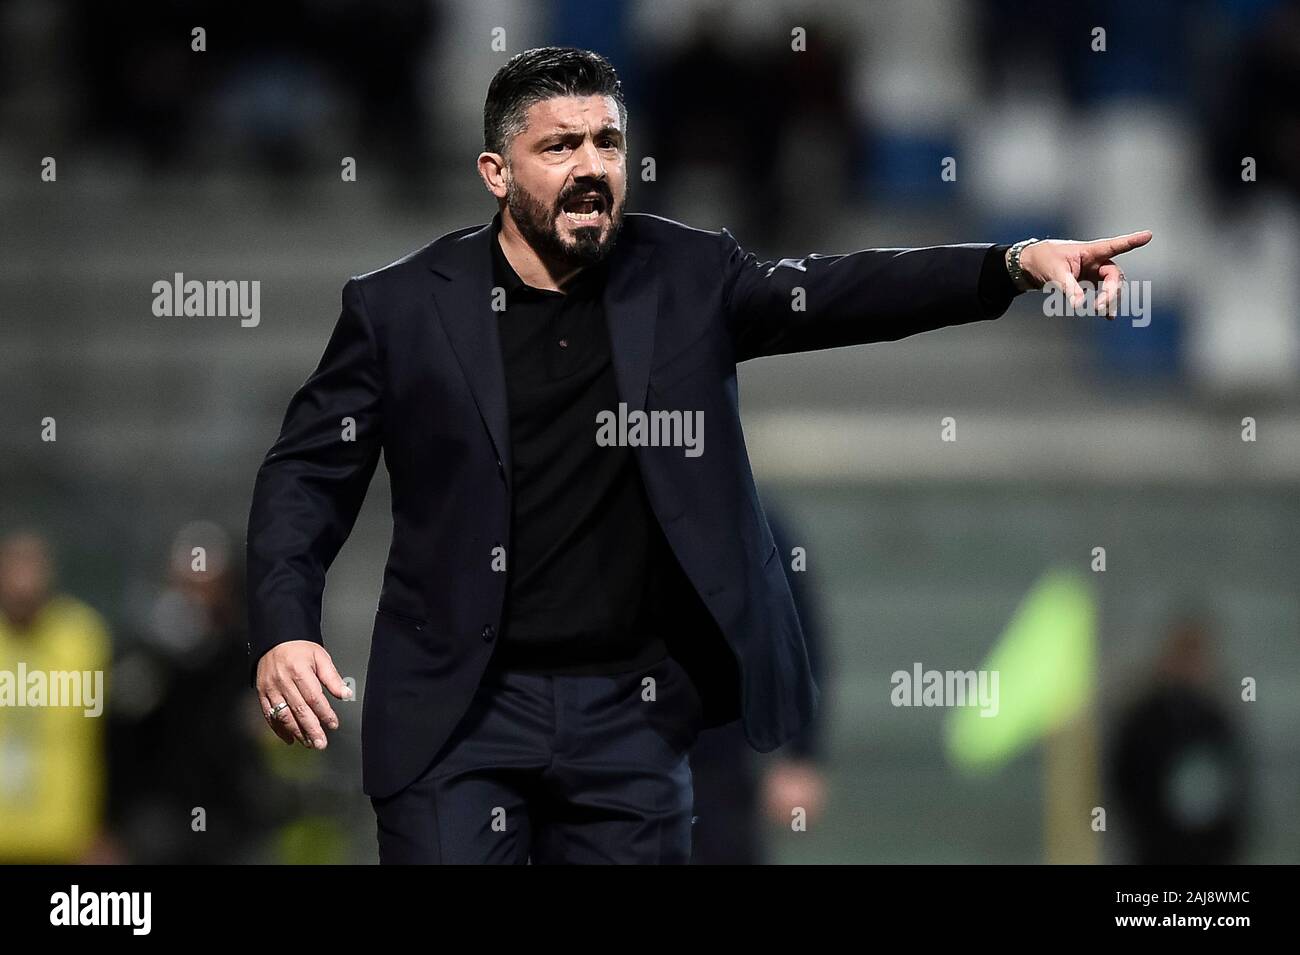 Reggio Emilia, Italy. 22 December, 2019: Gennaro Gattuso, head coach of SSC Napoli, gestures during the Serie A football match between US Sassuolo and SSC Napoli. SSC Napoli won 2-1 over US Sassuolo. Credit: Nicolò Campo/Alamy Live News Stock Photo